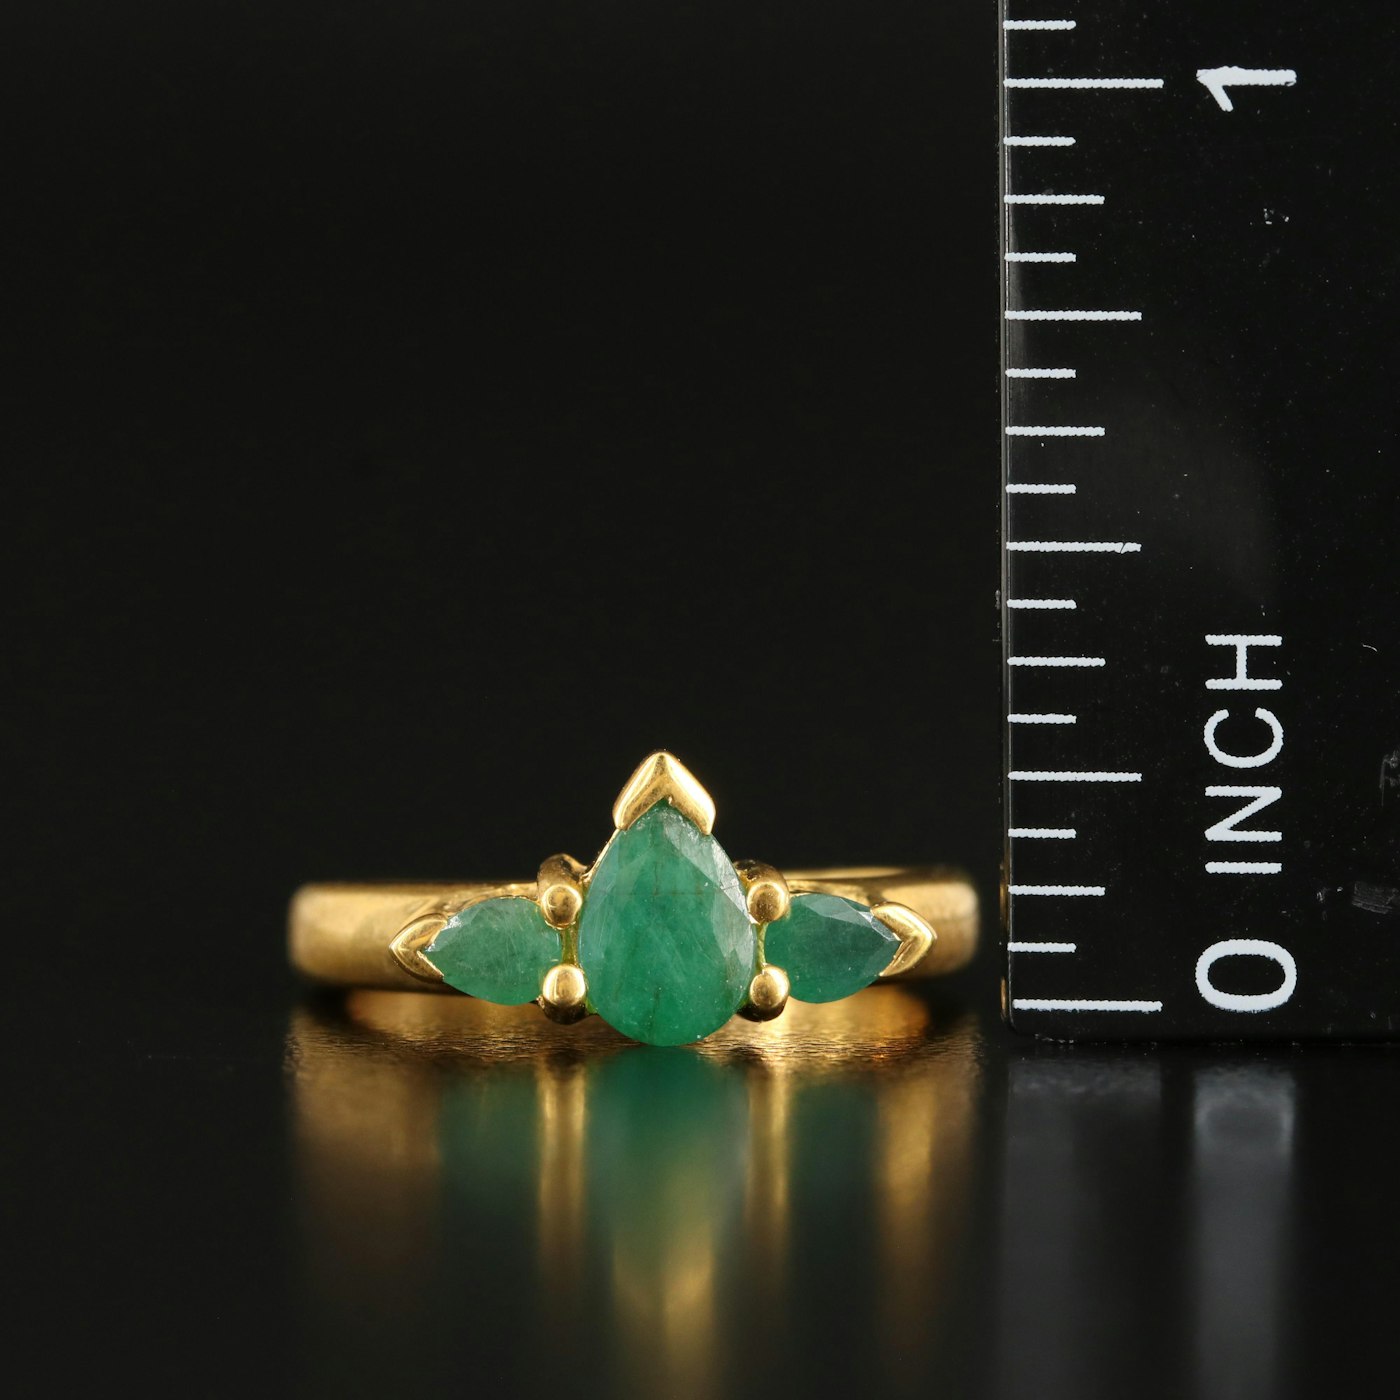 Gold-Tone Sterling Emerald Ring | EBTH